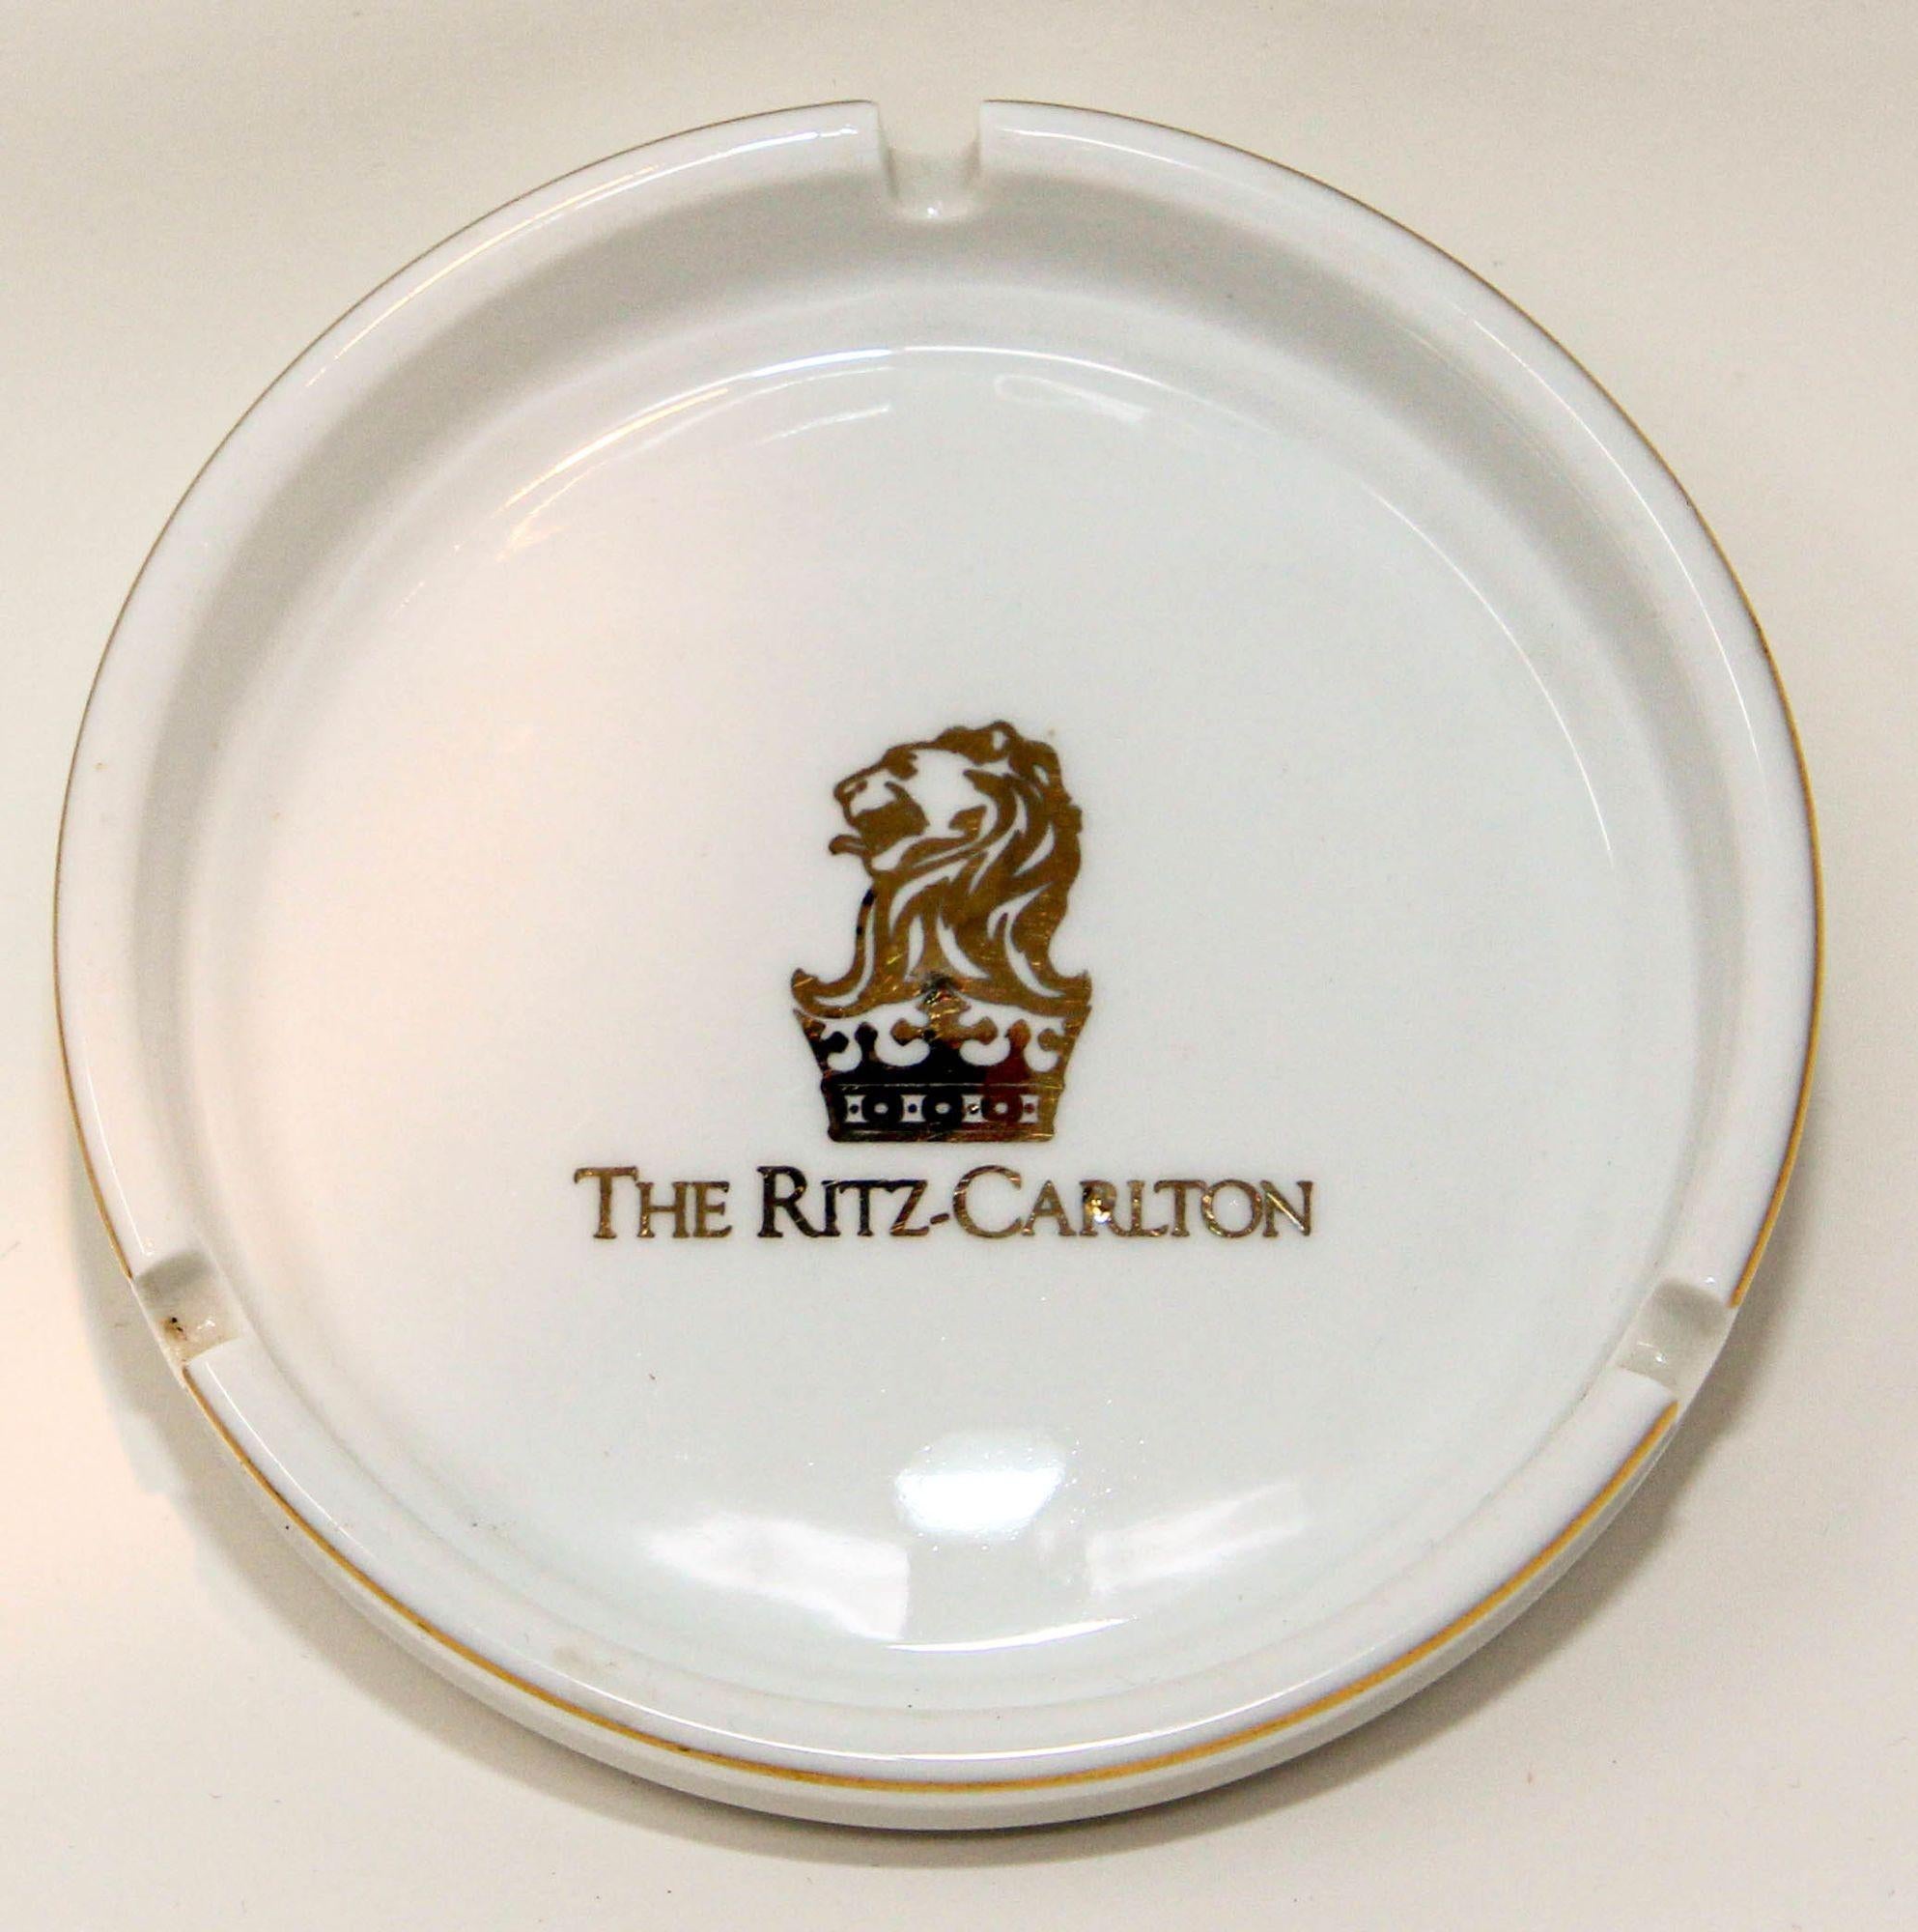 Collectible vintage The Ritz Carlton white and gold ashtray, catchall or jewelry Dish.
Vintage white and gold porcelain ashtray from the iconic 'The Ritz Carlton' hotel, circa 1970's.
Iconic lion and crown logo in gold at center. 
Great for its